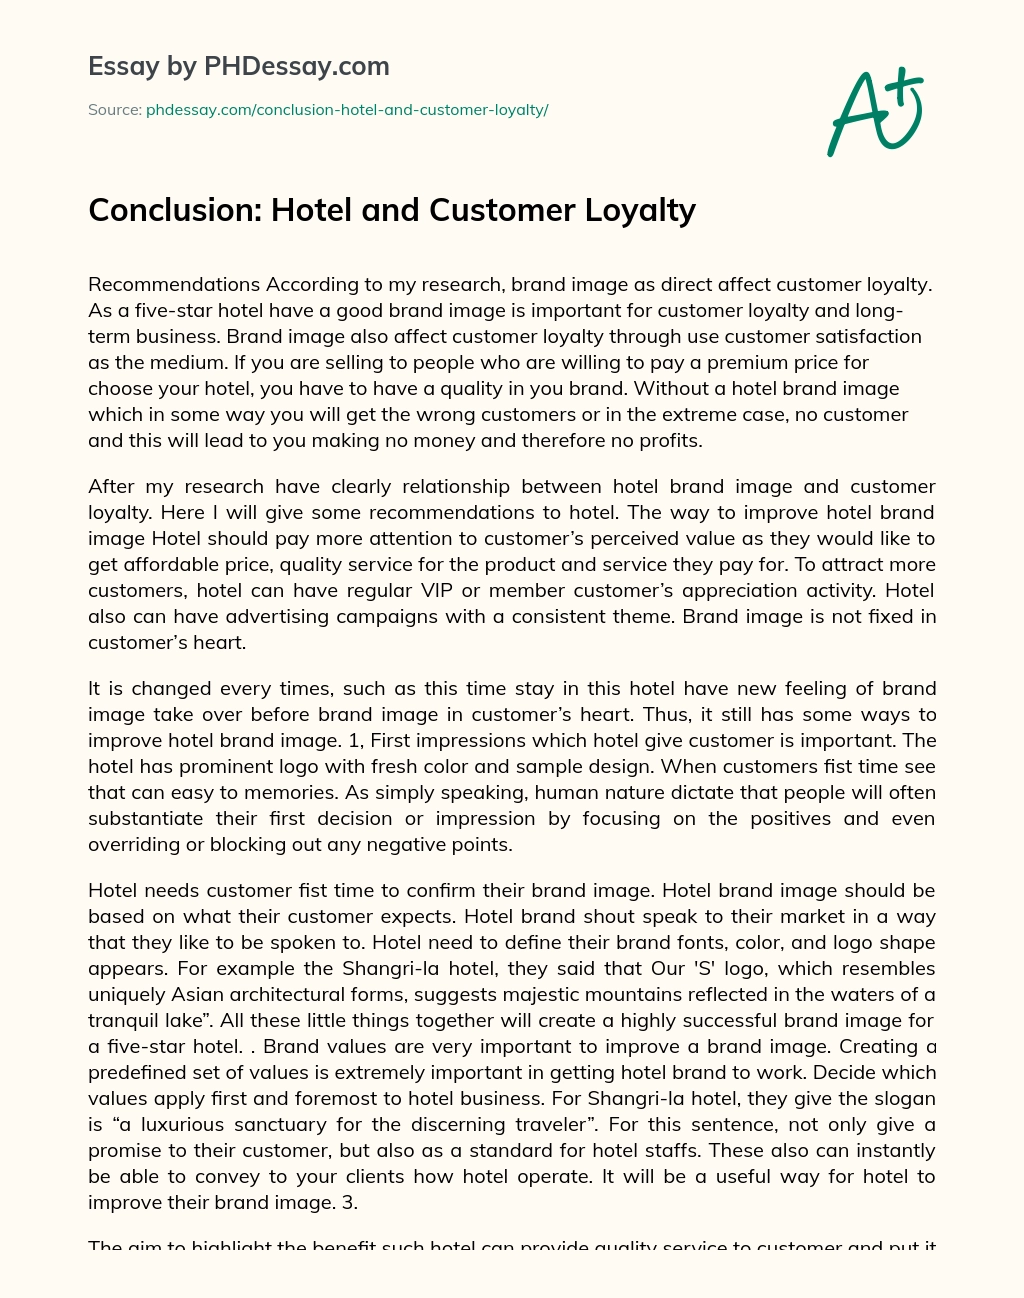 Conclusion: Hotel and Customer Loyalty essay